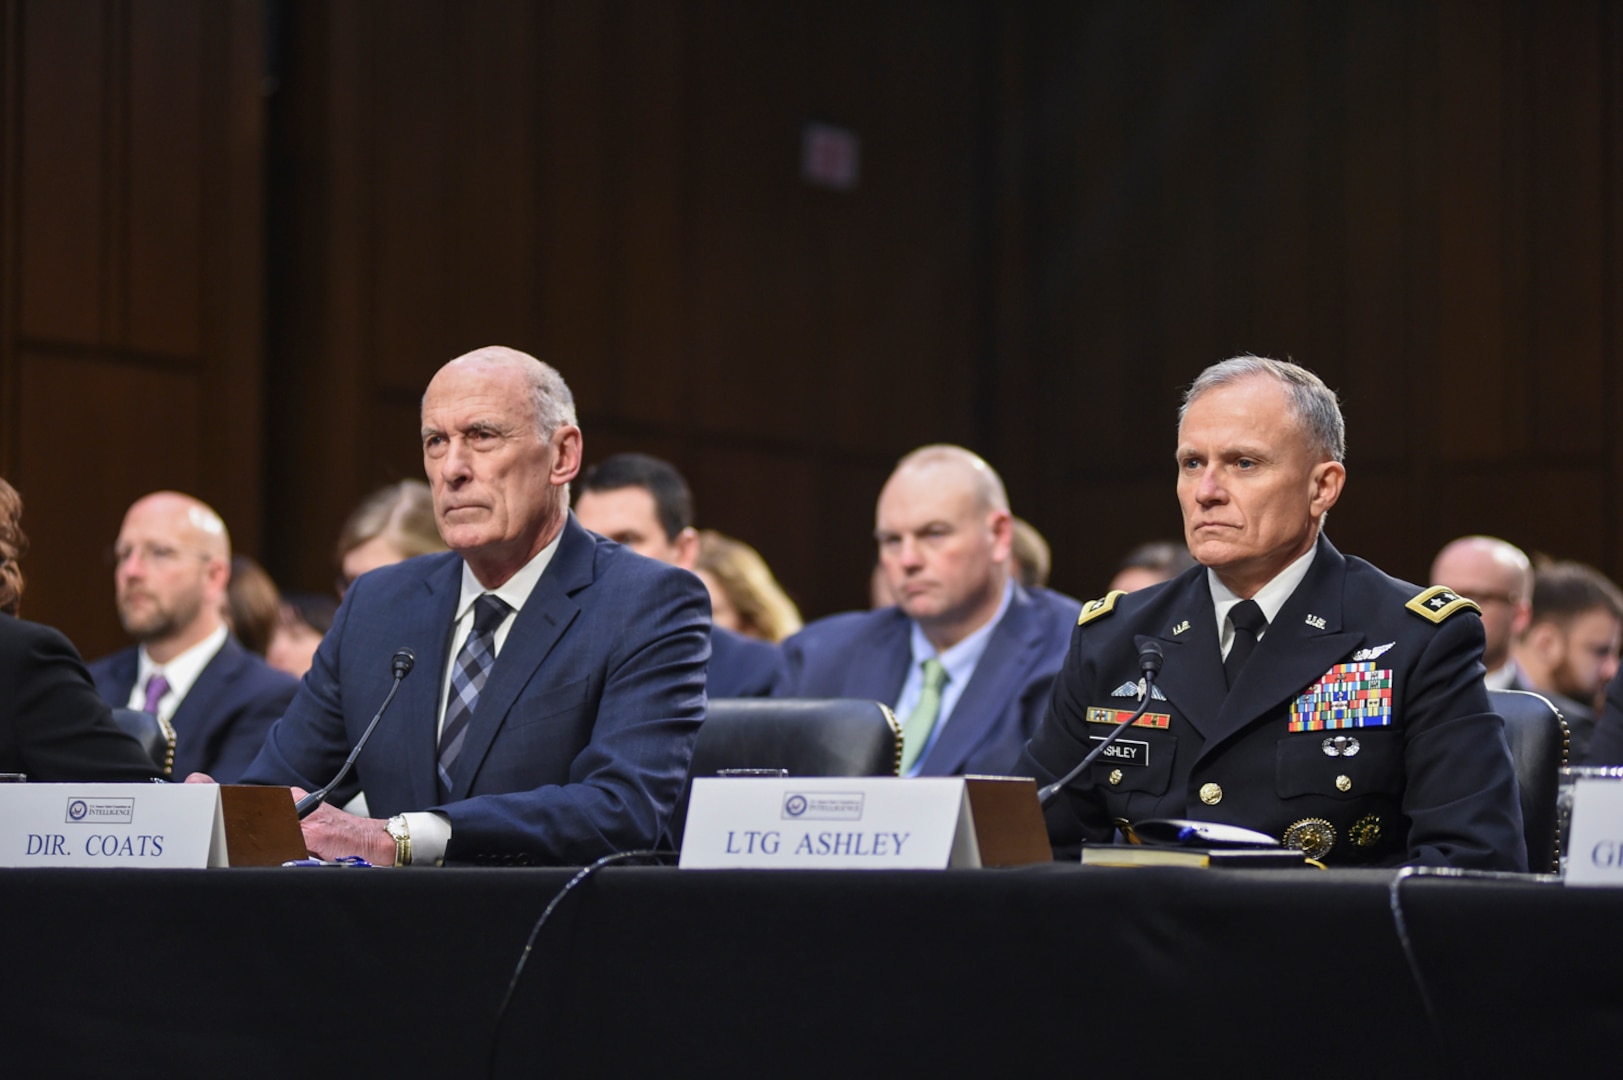 Director of National Intelligence Daniel Coats, left, and Director of the Defense Intelligence Agency Lt. Gen. Robert P. Ashley, Jr. listen to questions from lawmakers during the Worldwide Threat Assessment, Jan. 29, 2019, on Capitol Hill.